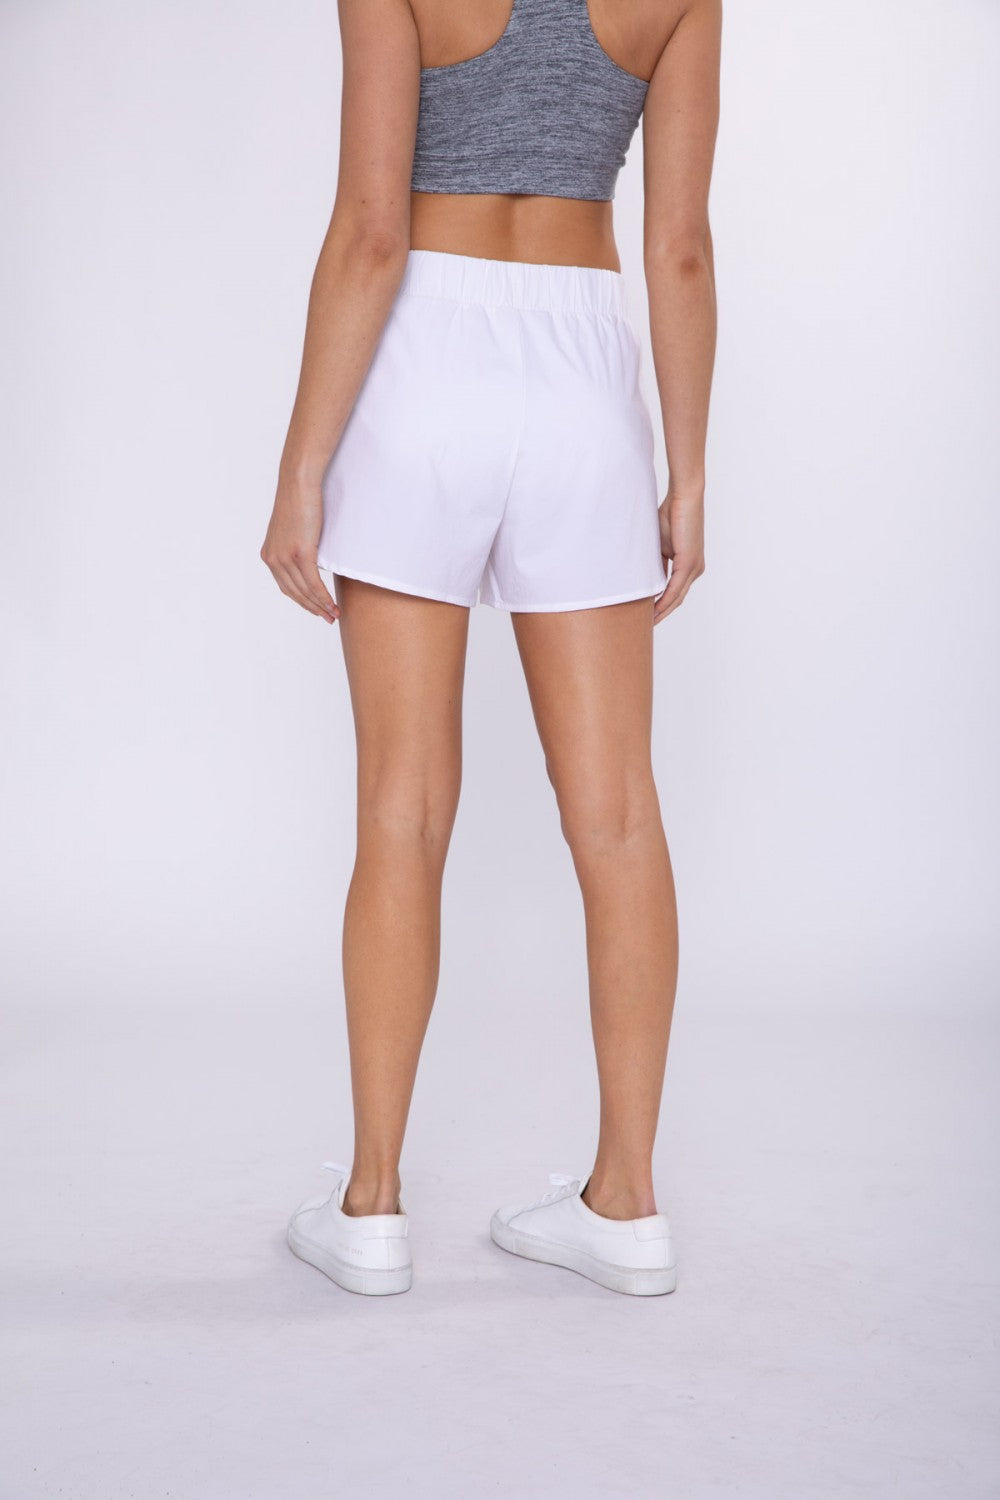 Athleisure Shorts with Bulit-in Liner White